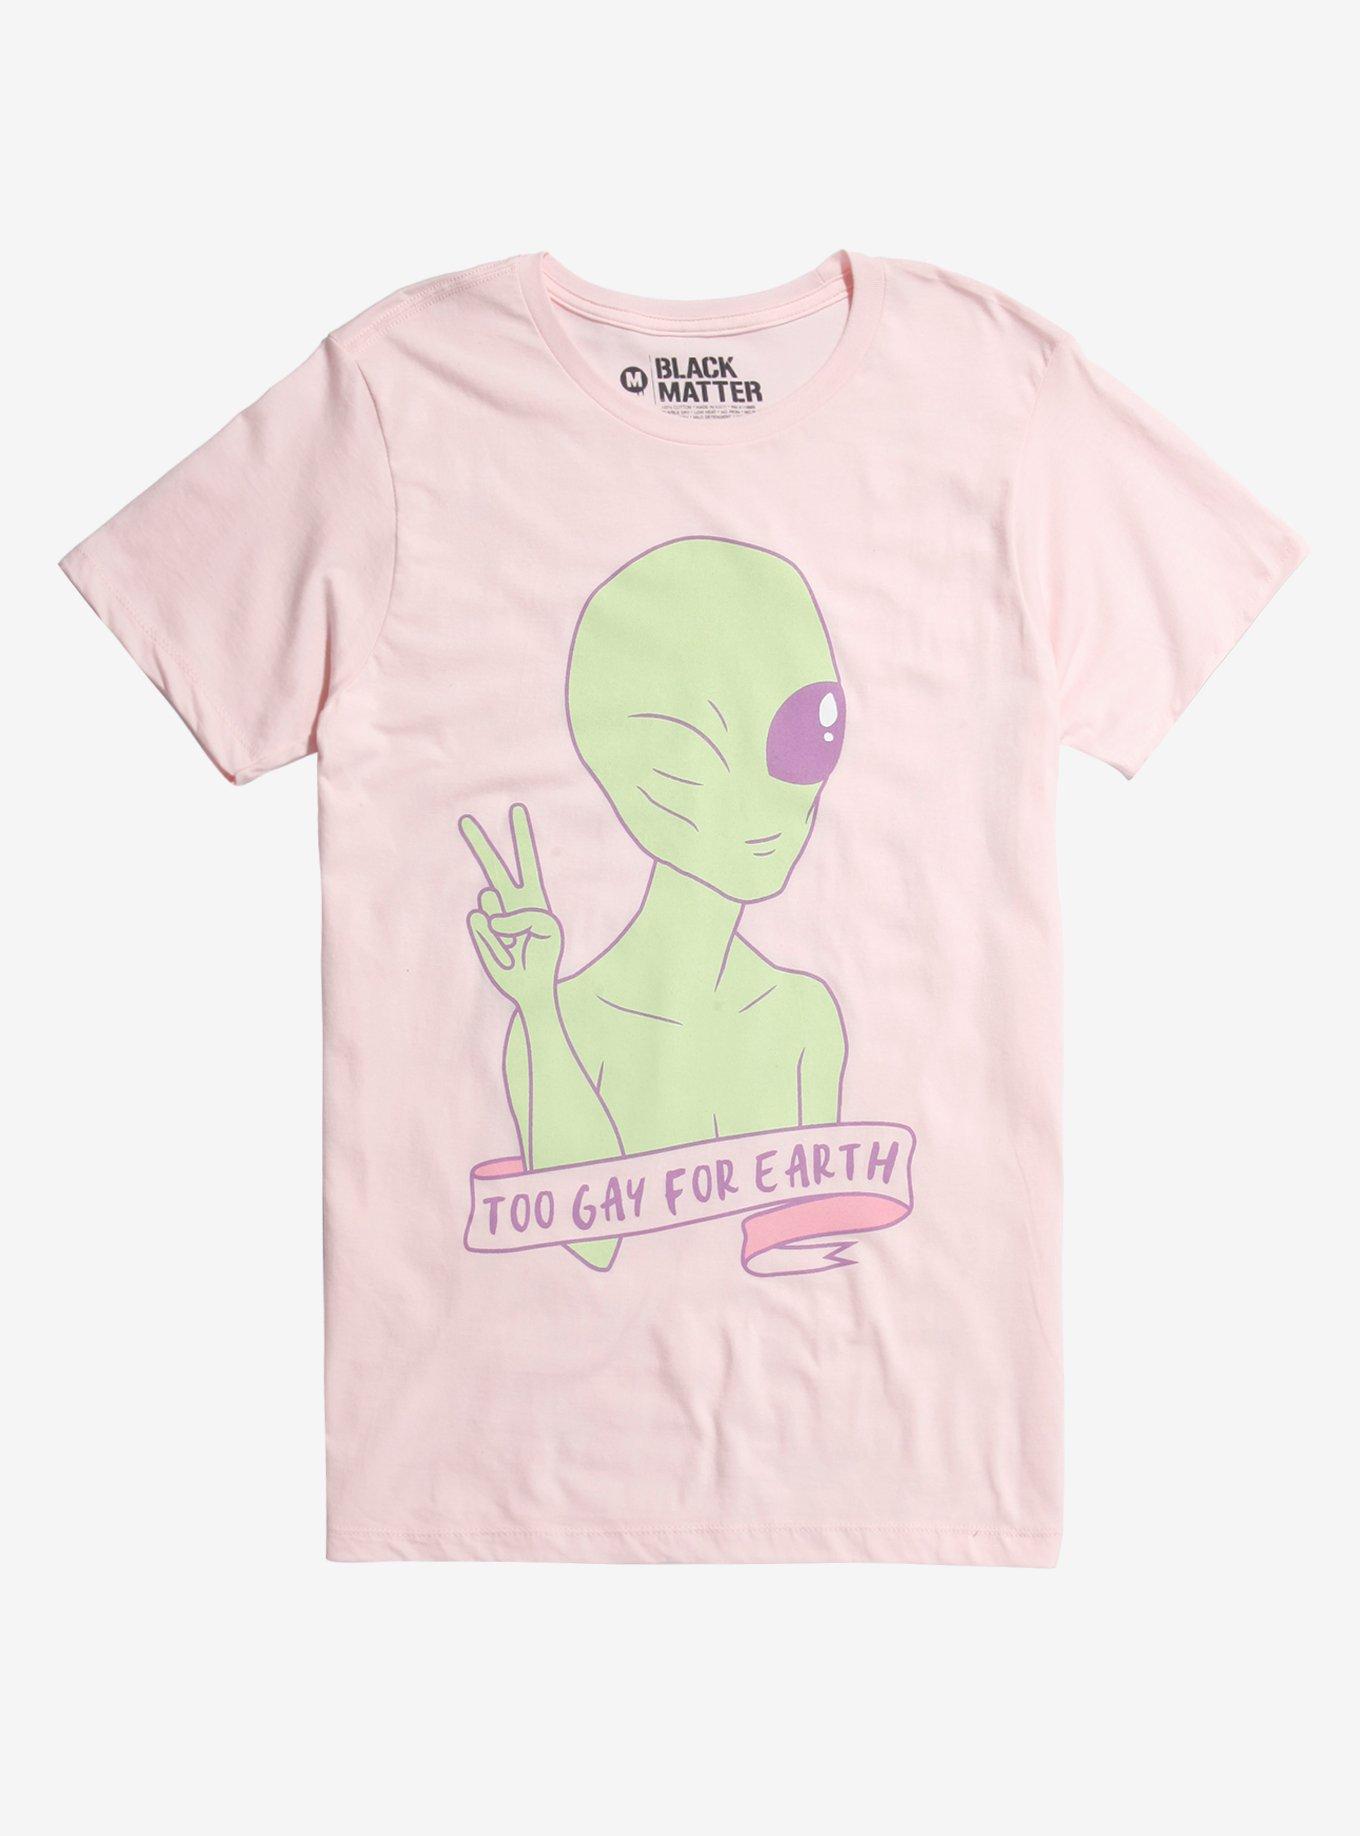 Alien Too Gay For Earth Pastel T-Shirt, PINK, hi-res